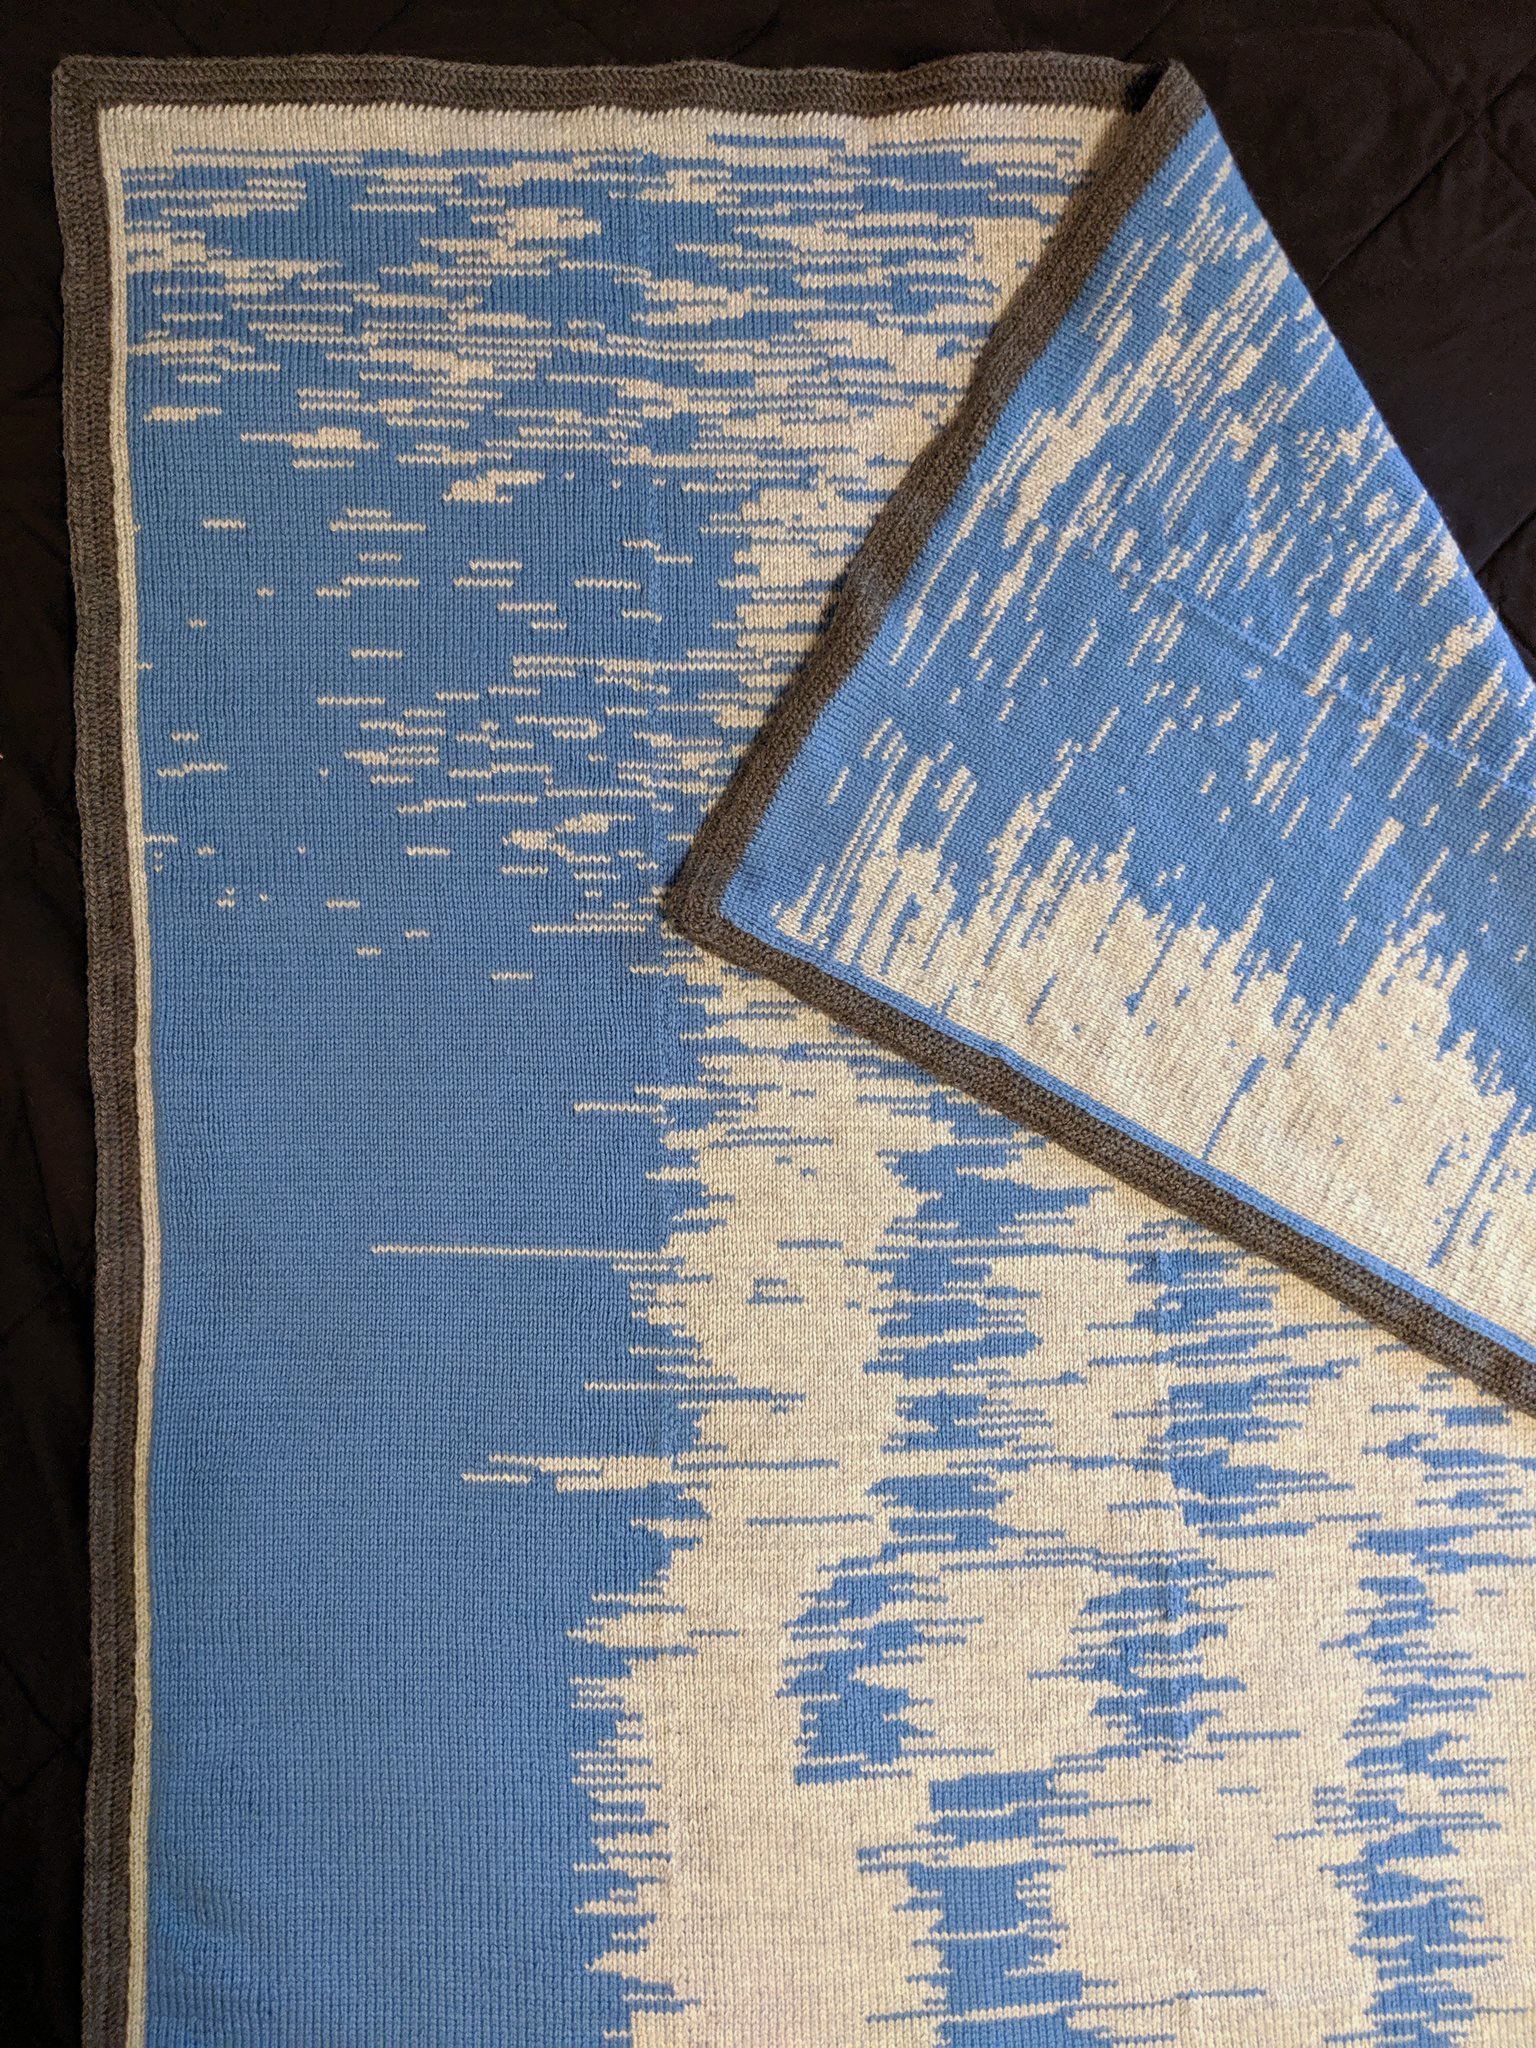 A Father Transformed Data of his Son’s First Year of Sleep into a Knitted Blanket